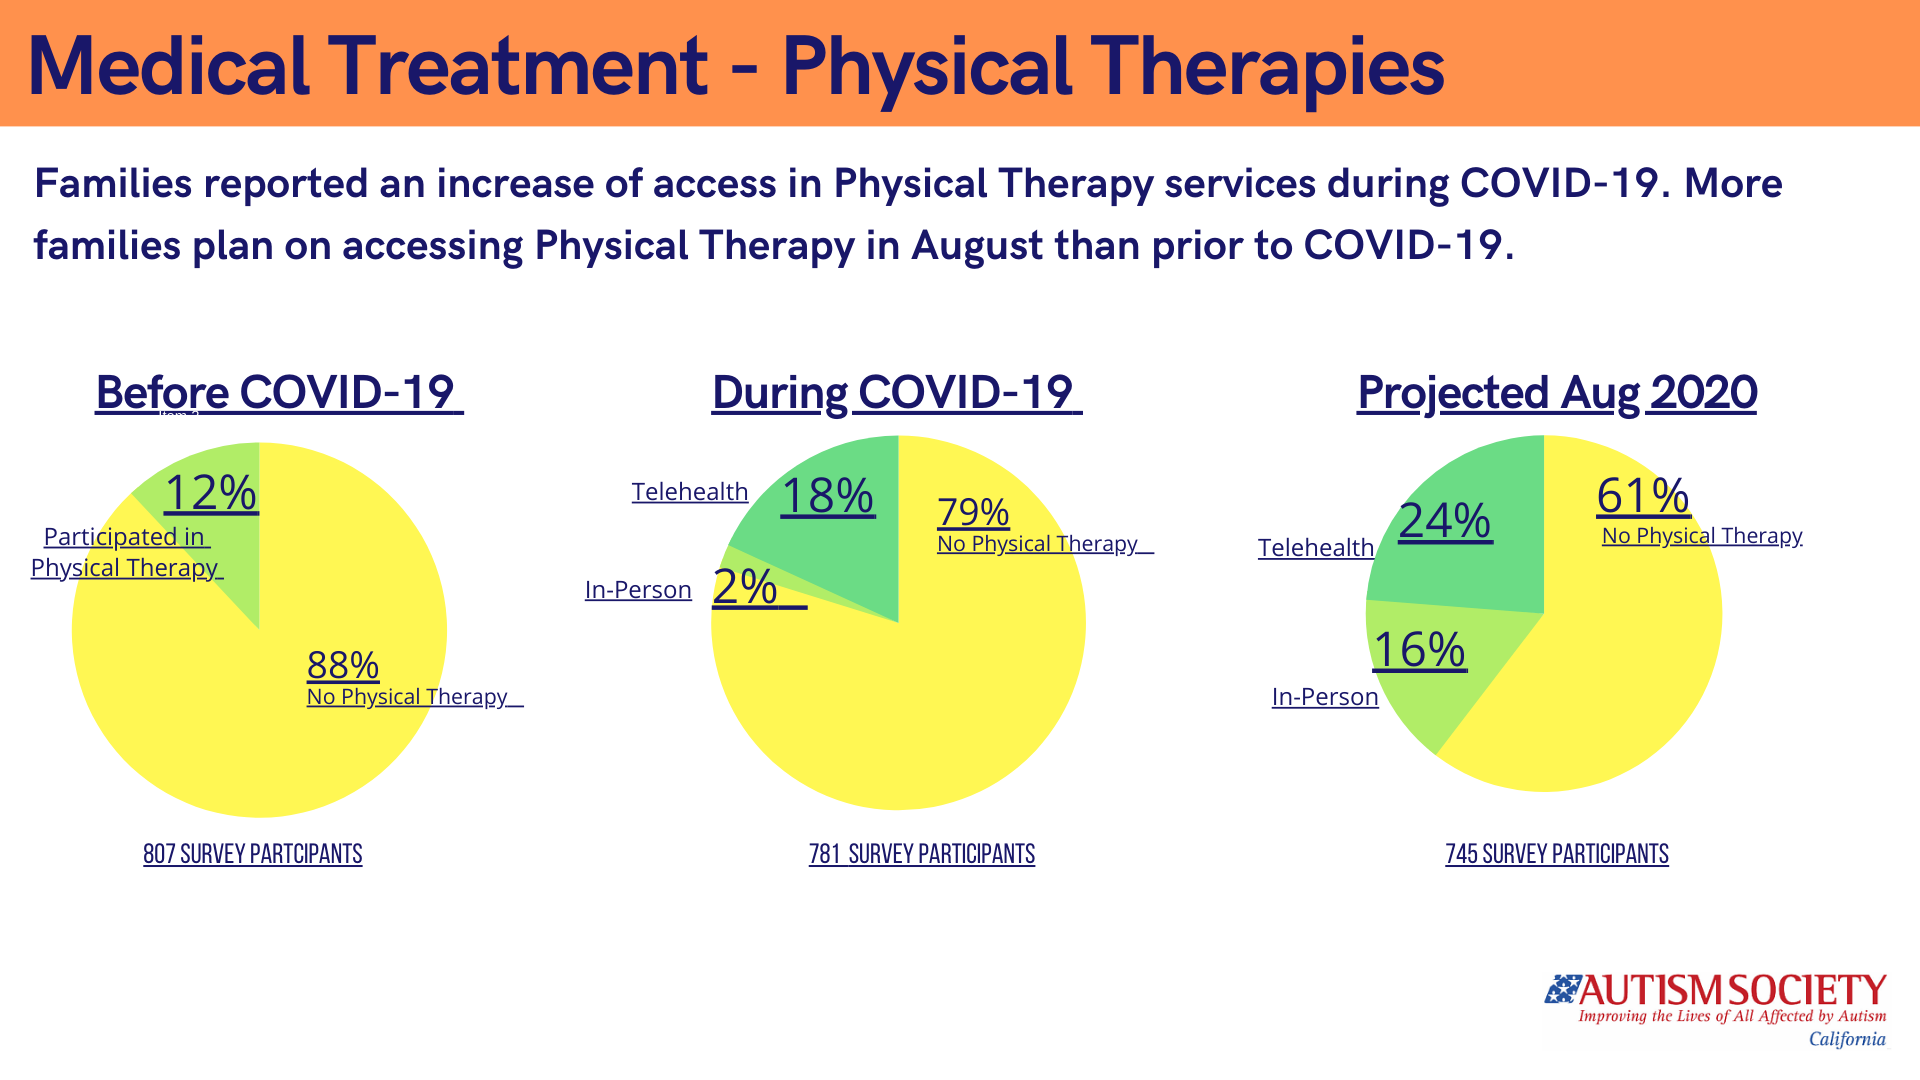 Physical therapies and COVID